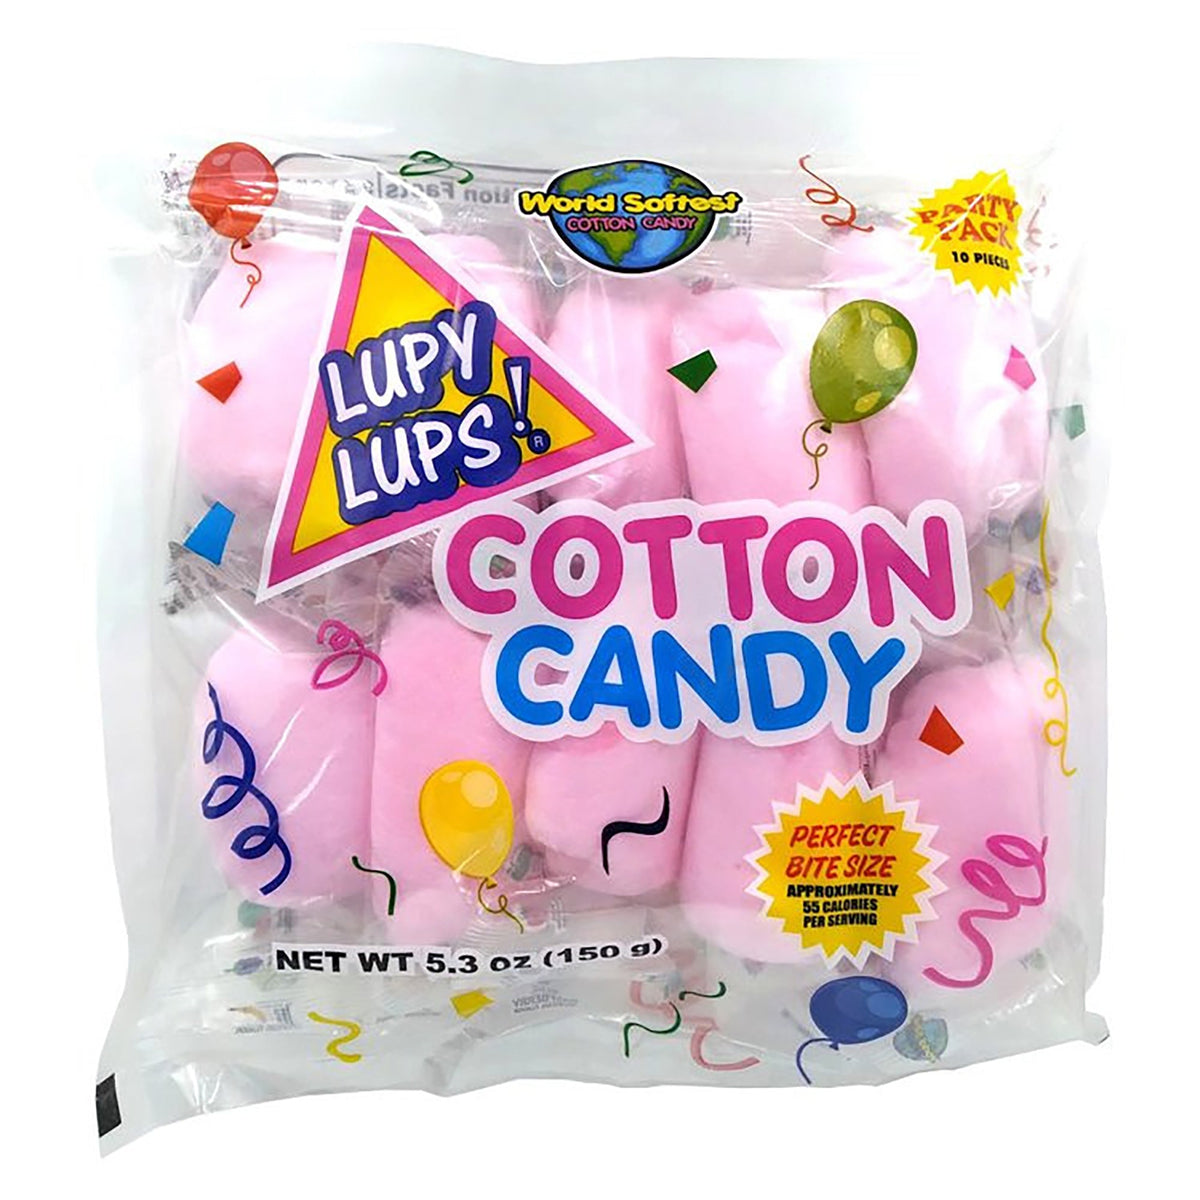 ALBERT & SON INC. Candy Strawberry Cotton Candy, 10 Count 850015776564